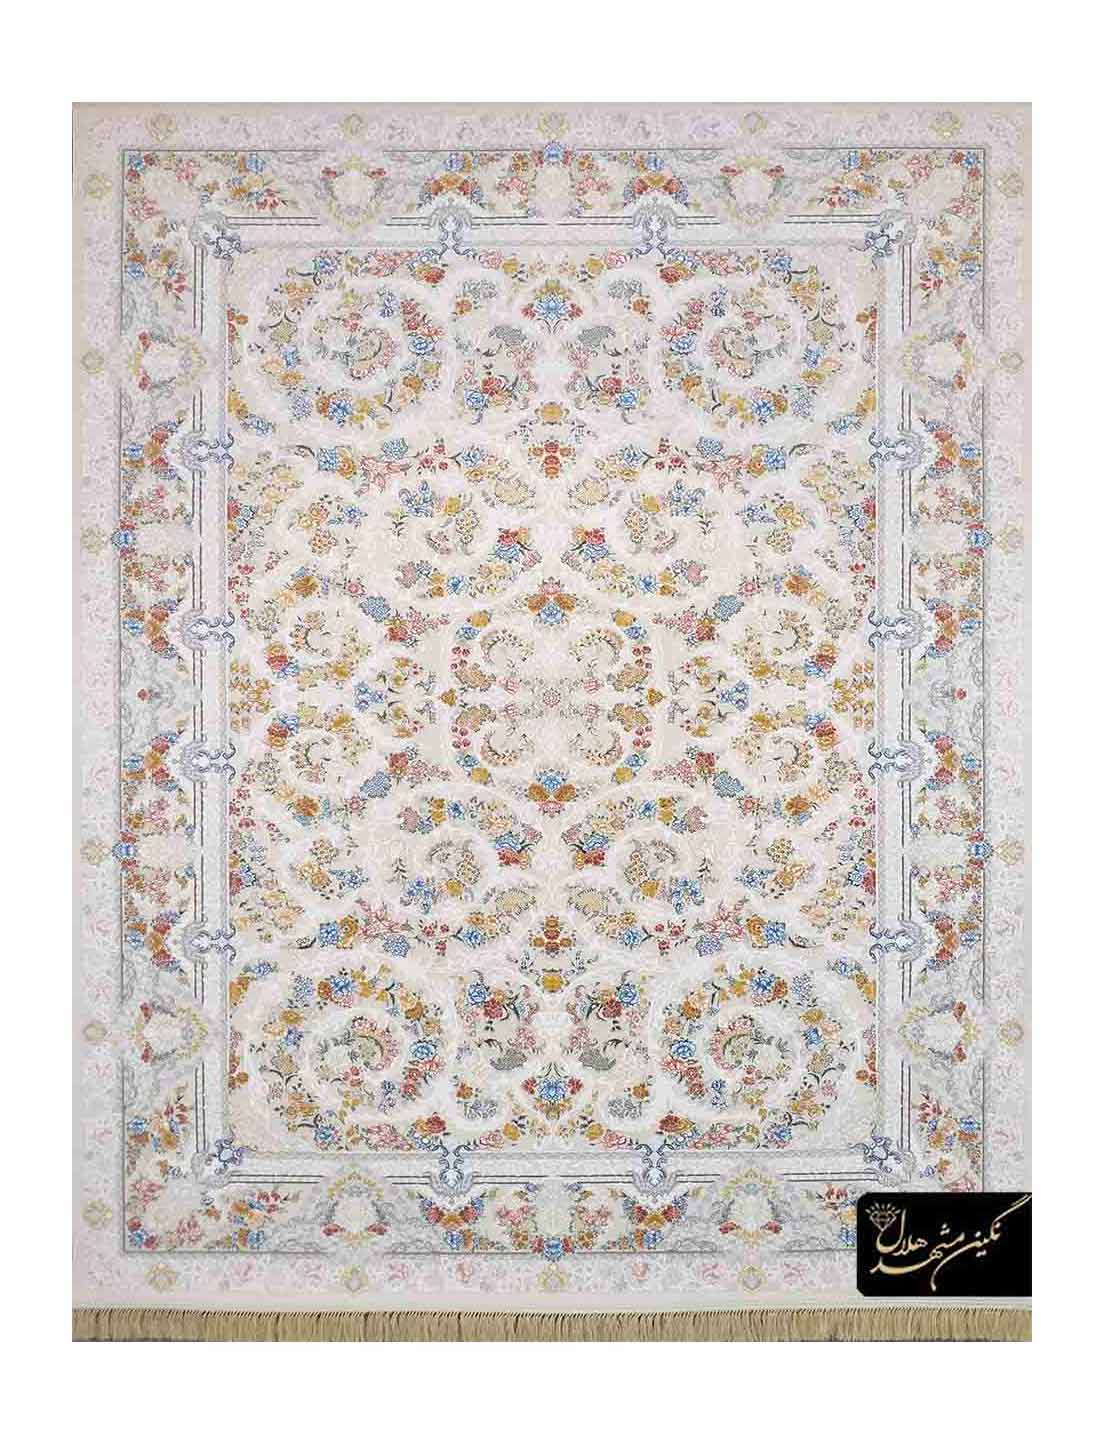 Machine-made Cream and Grey Floral Persian Area Rug 5209